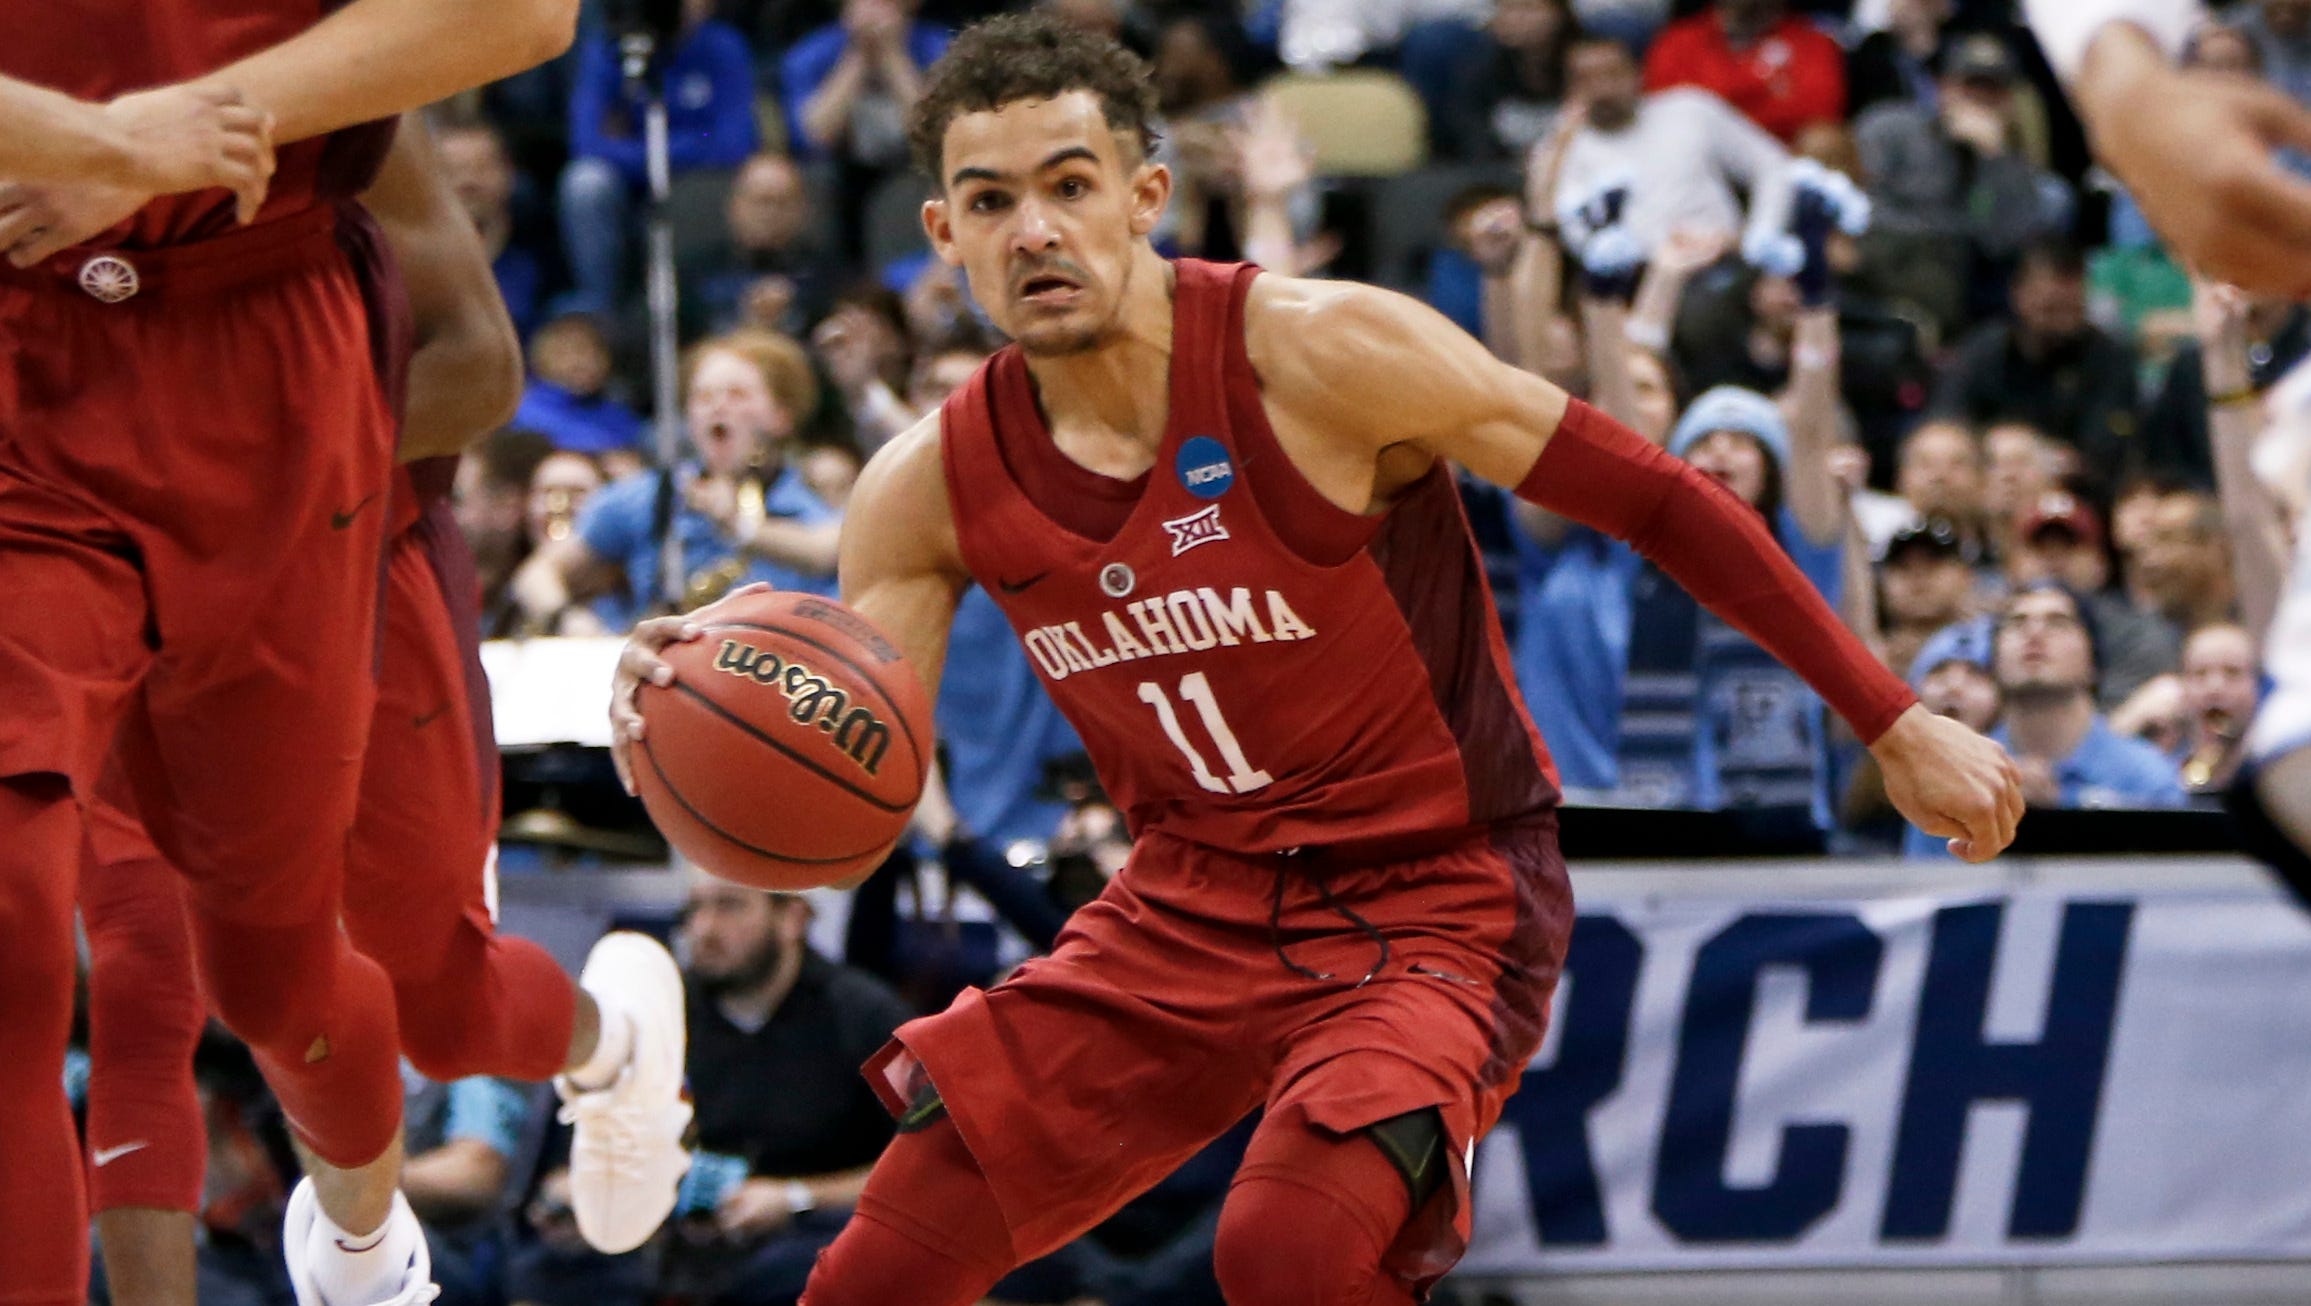 6. Orlando Magic: Trae Young, PG, Fr., Oklahoma. The Magic need an infusion of talent and energy to match with Aaron Gordon. They have a void at point guard and Young would be a huge get for them. He was one of the most exciting players in college basketball last season and could bring a boost to a moribund franchise with new coach Steve Clifford.